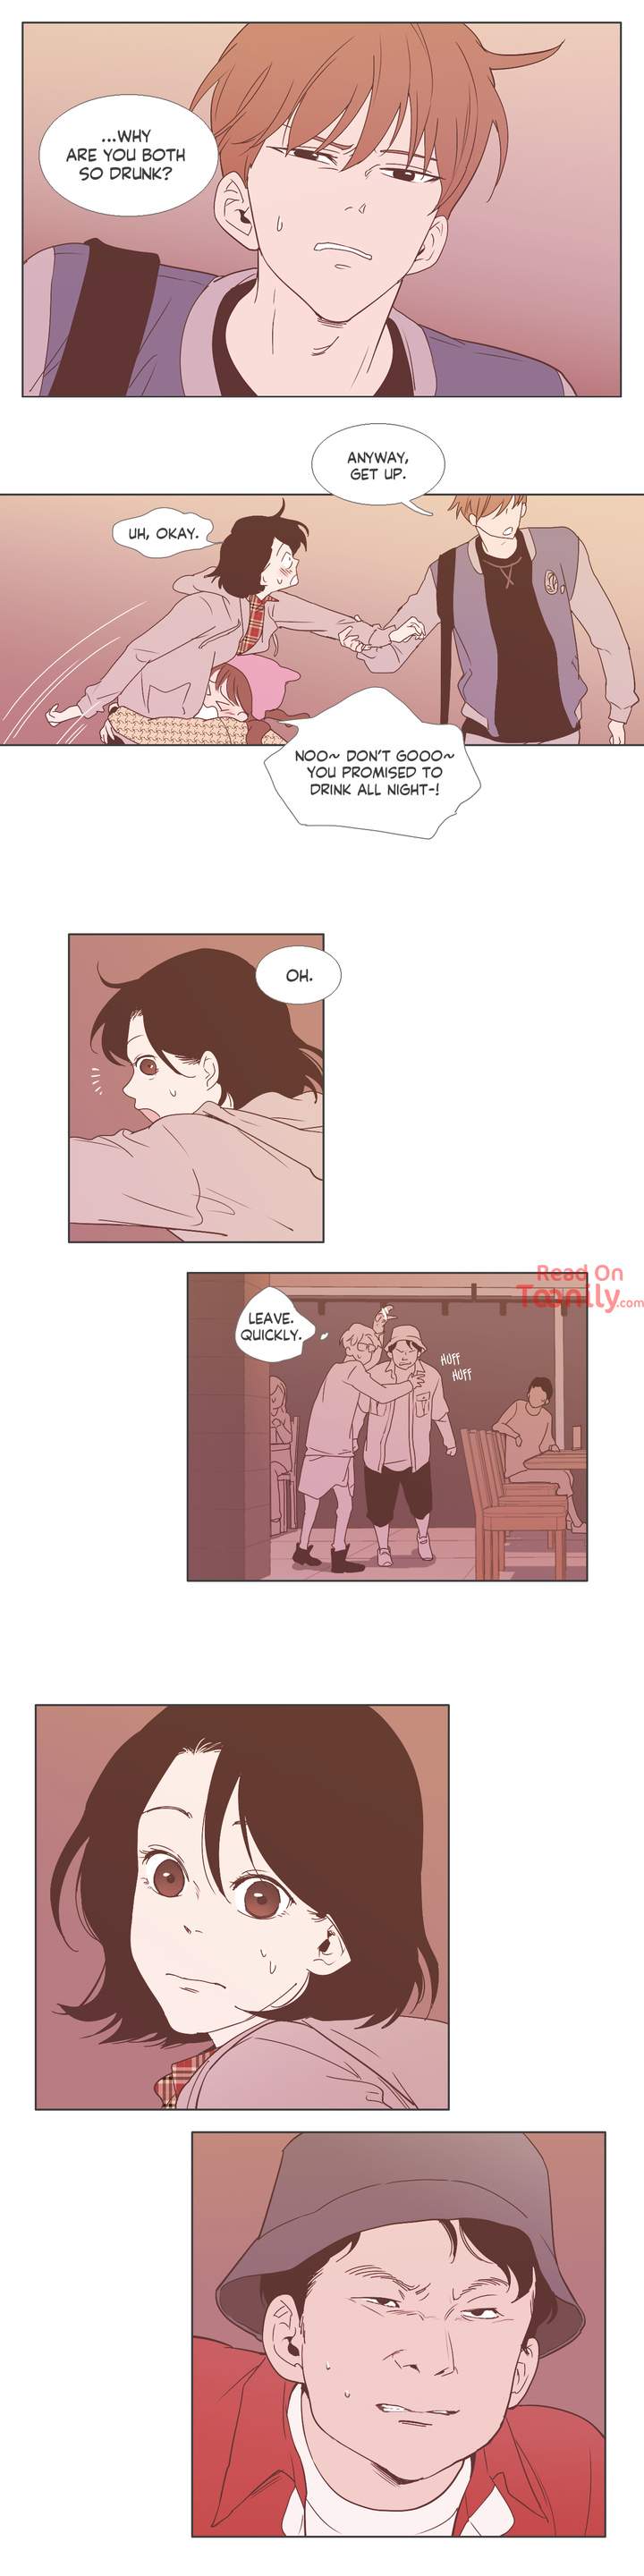 Something About Us - Chapter 6 Page 7